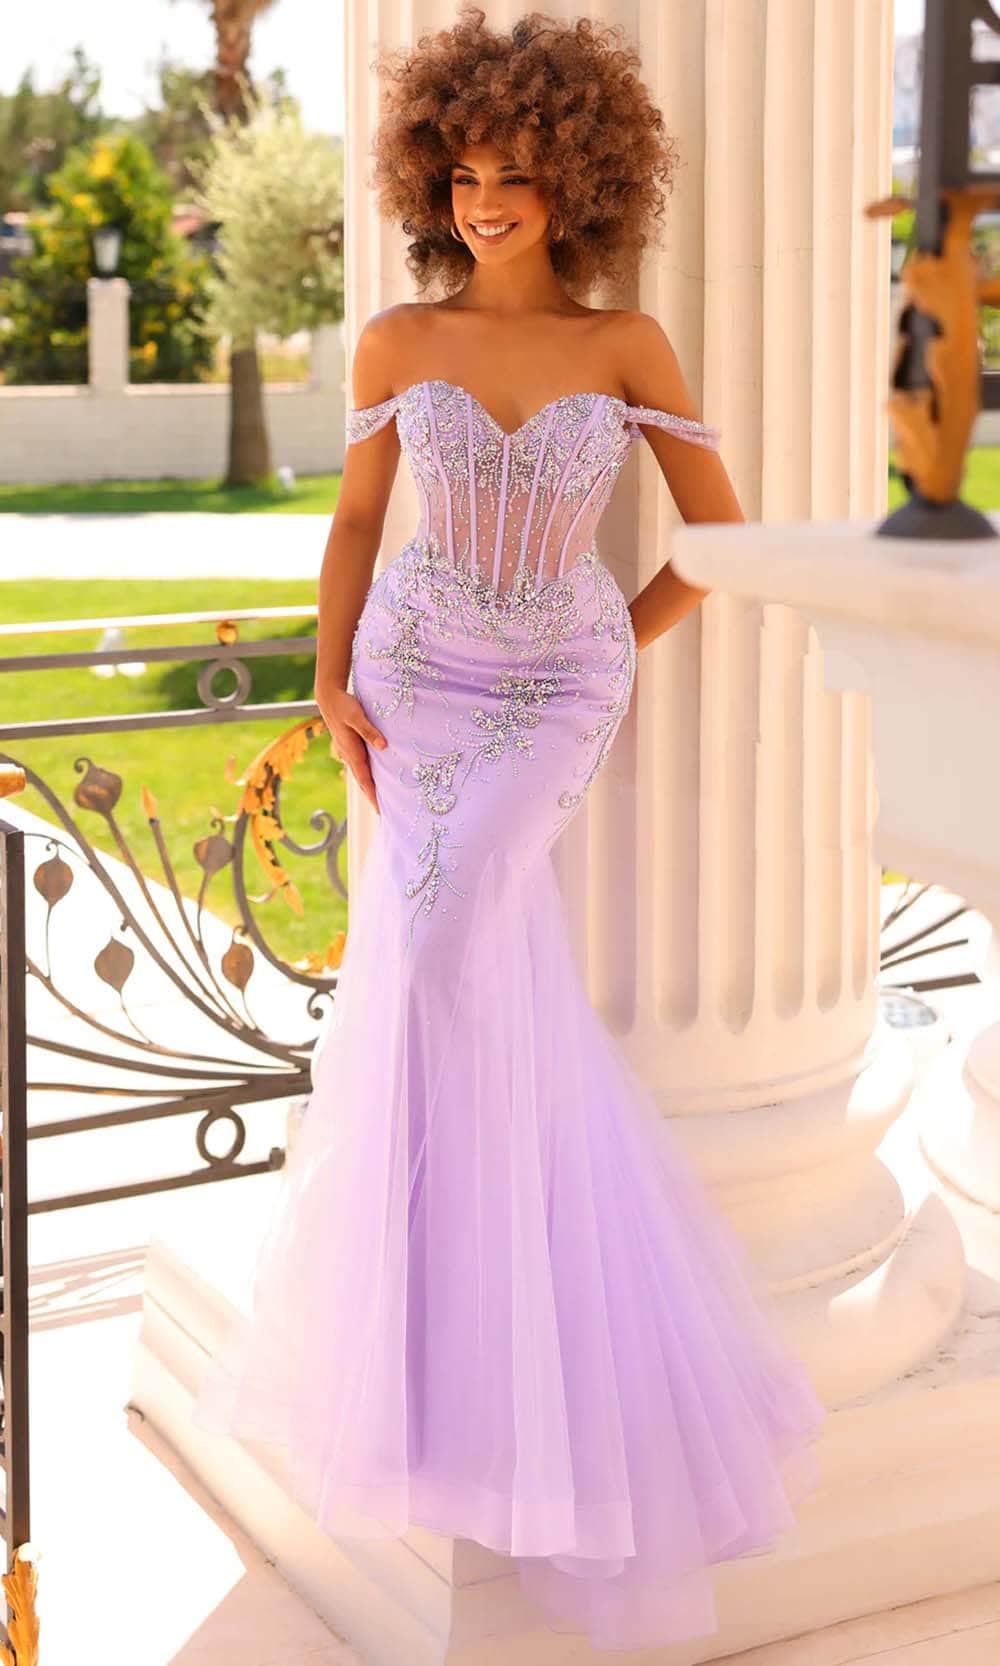 Clarisse 811020 - Beaded Sweetheart Godets Prom Gown
